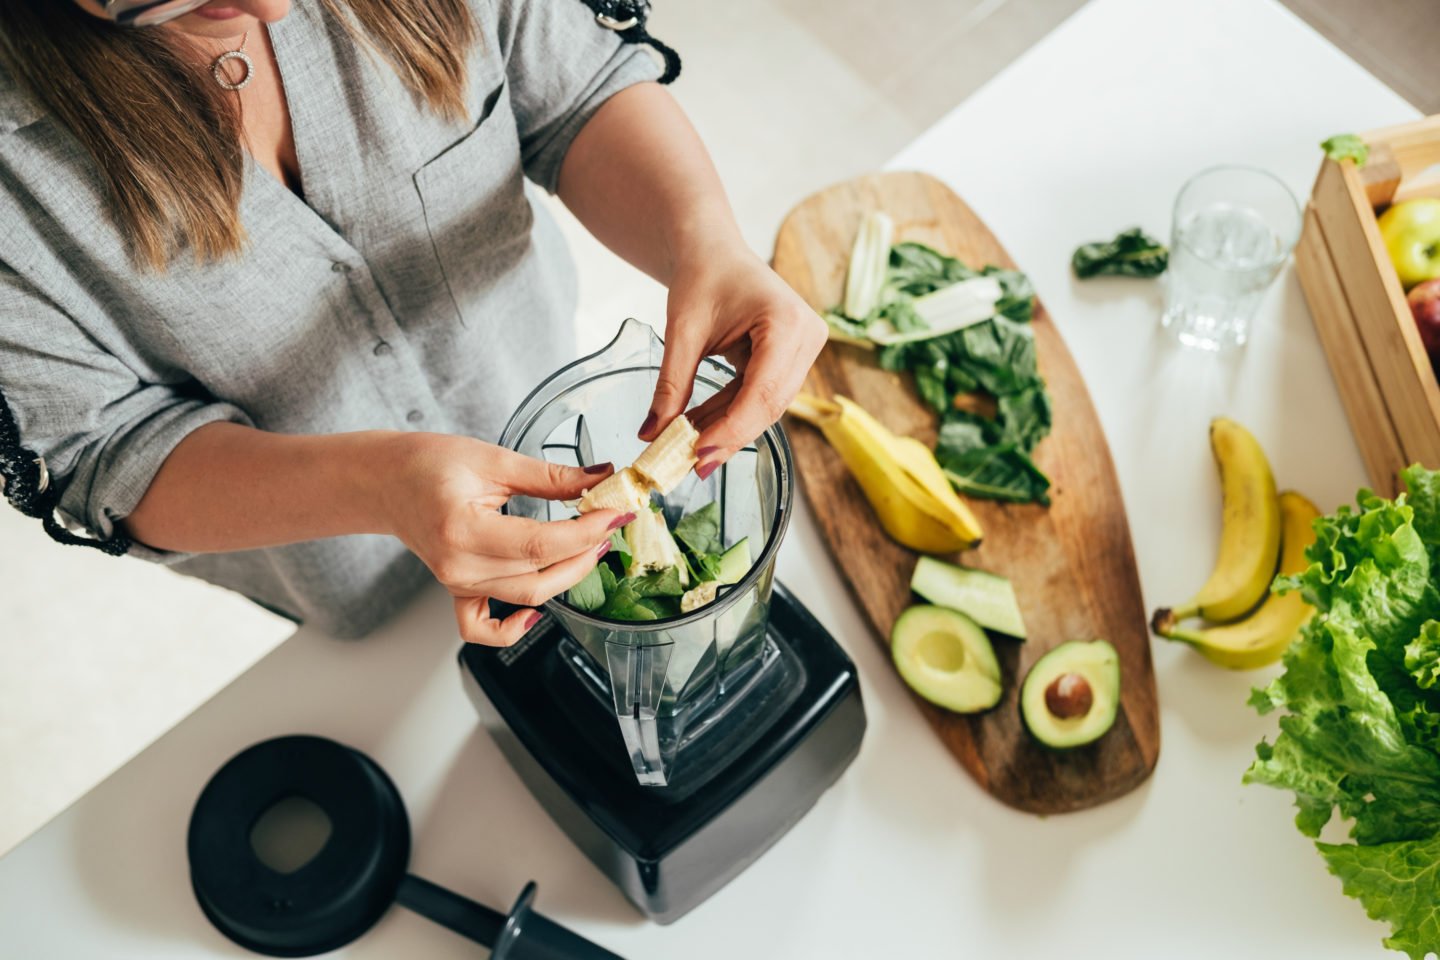 Woman Adding Ingredients To Blender For Smoothie